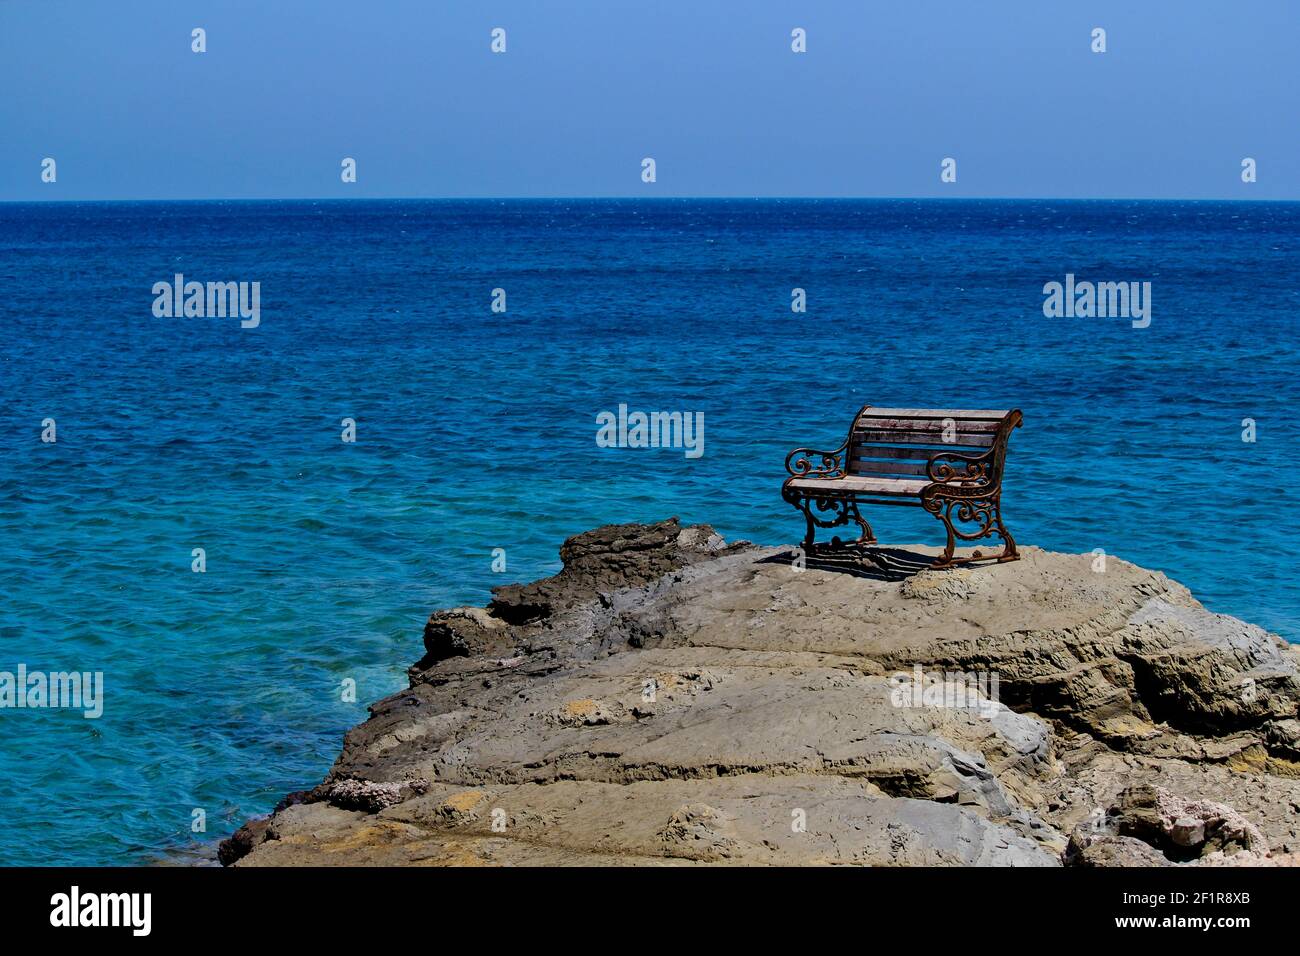 Karpathos, Greece;13 August 2013;Lonely in the blue Stock Photo